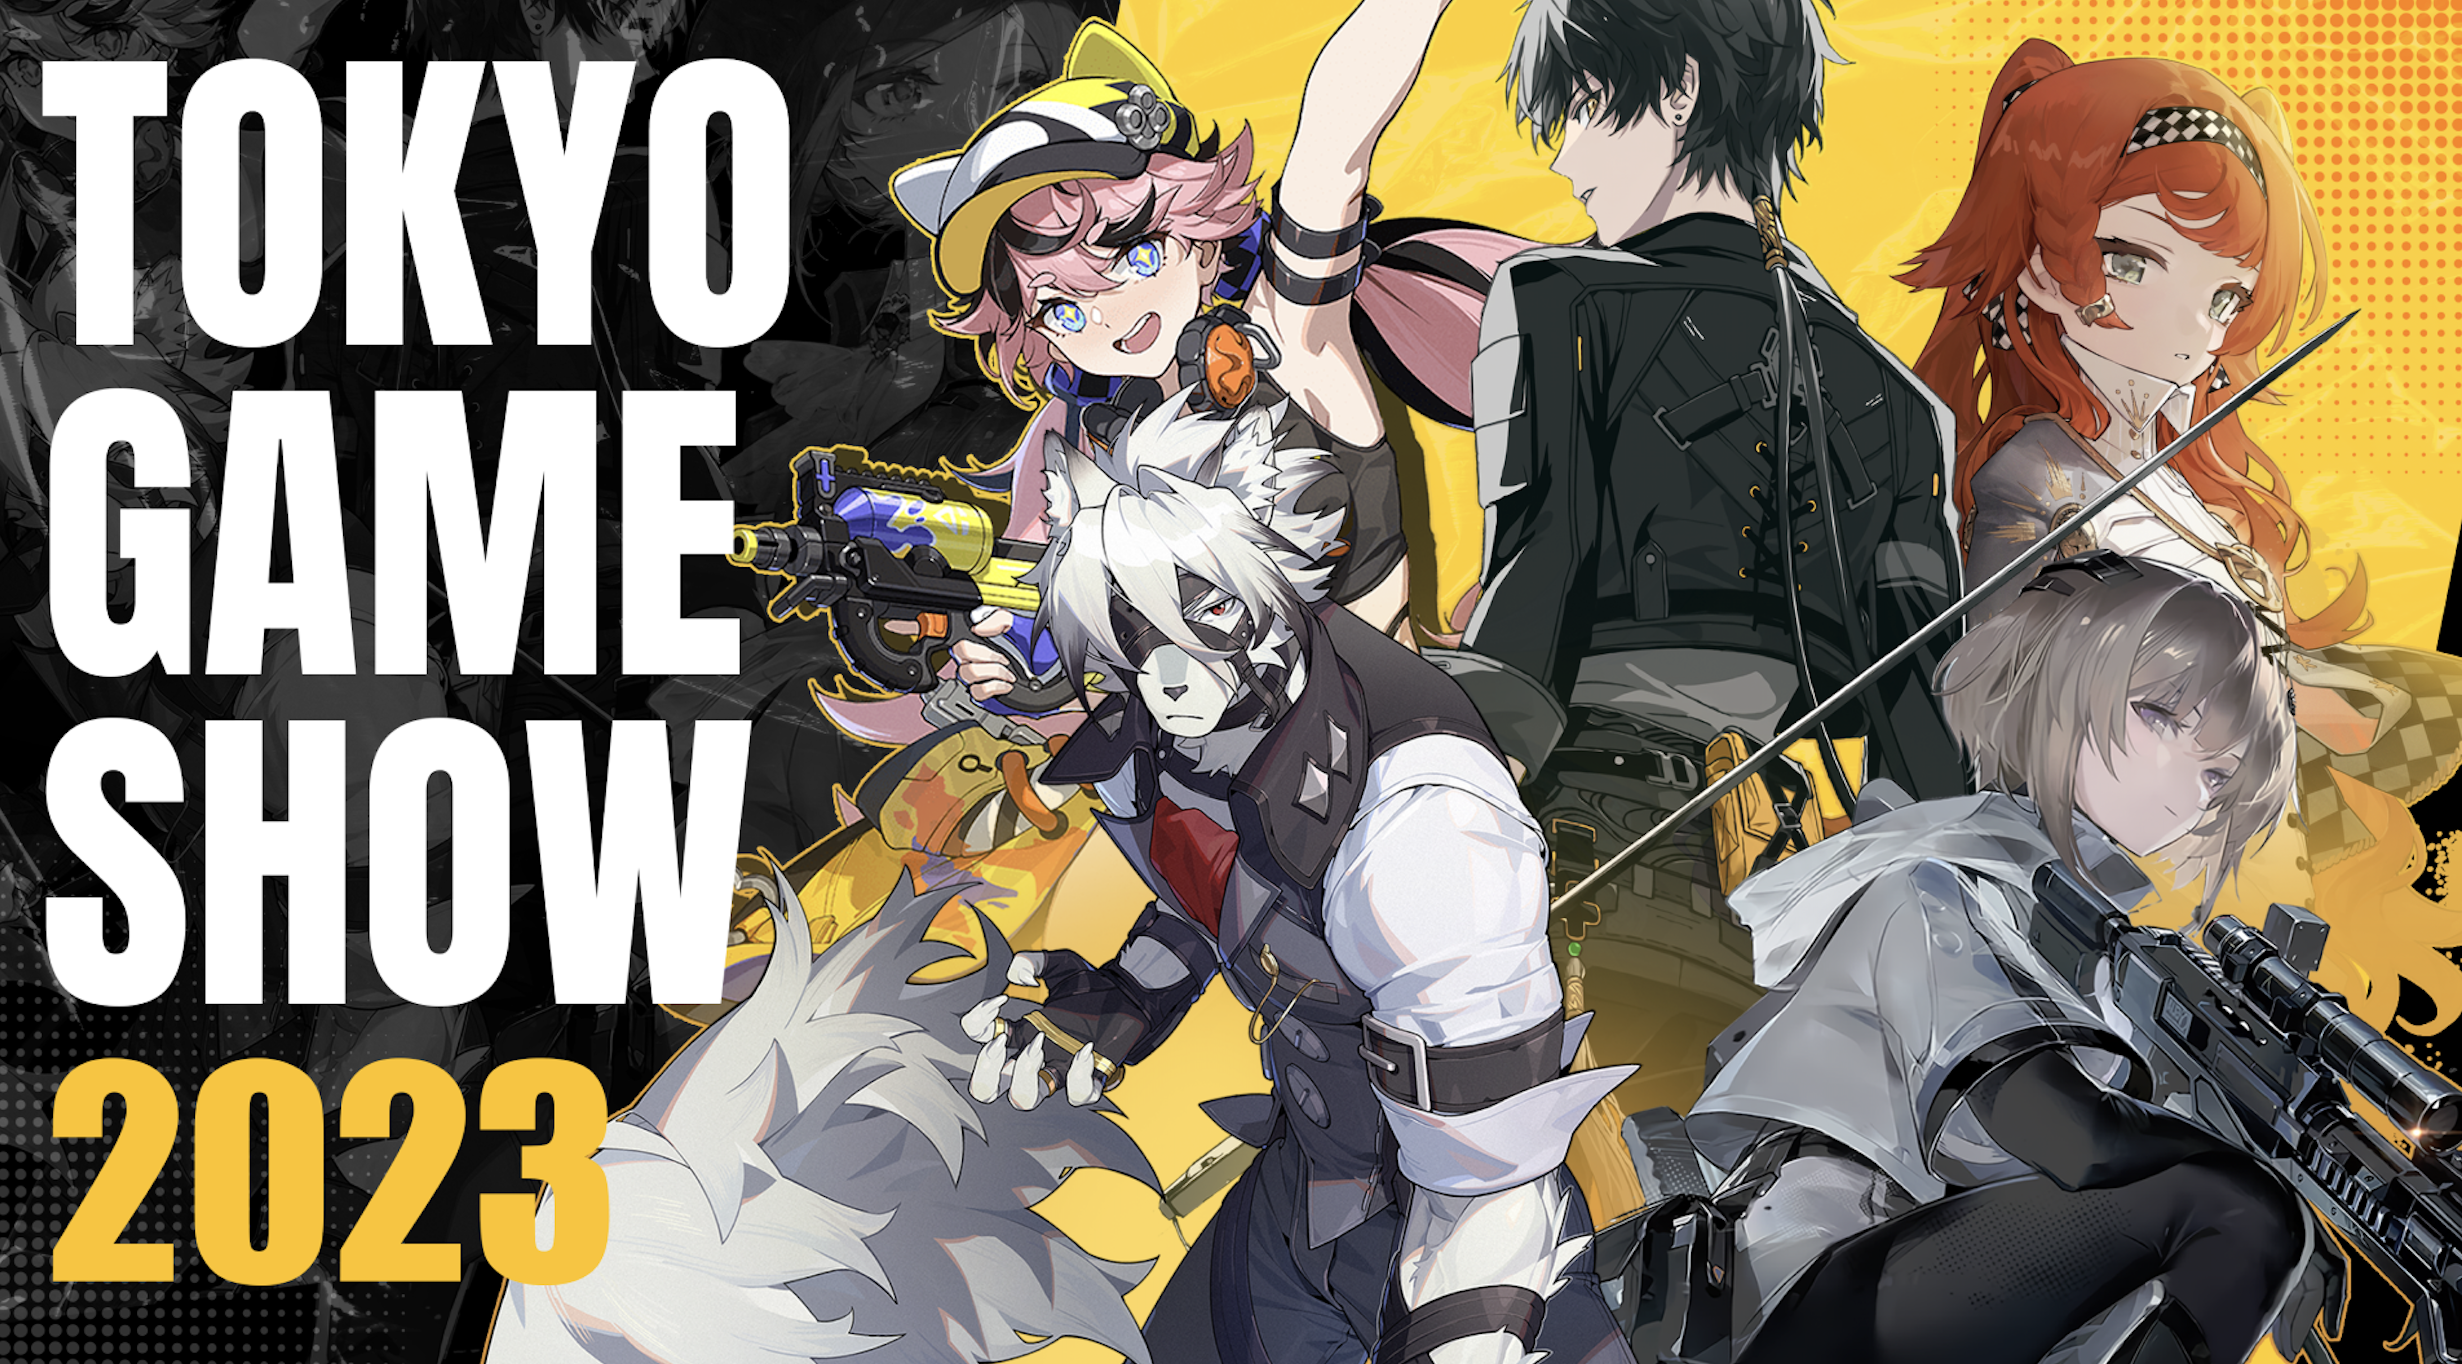 What's new at Tokyo Game Show? Let TapTap show you